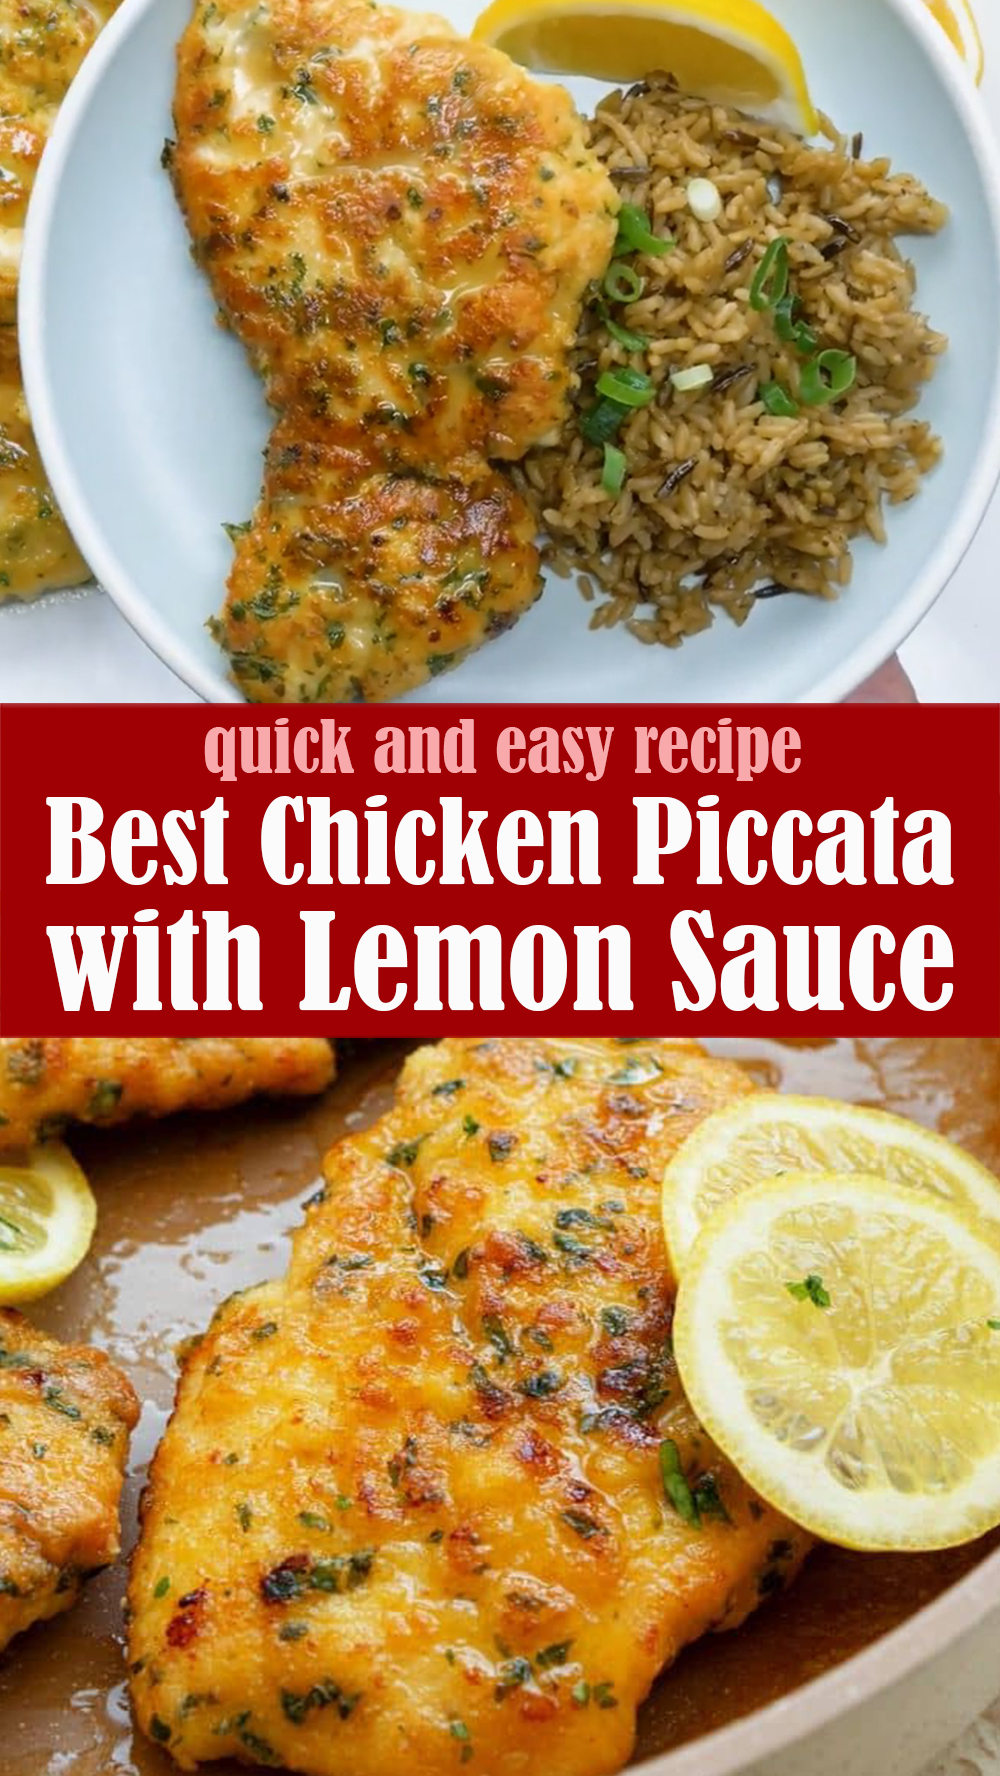 Easy Chicken Piccata with Lemon Sauce